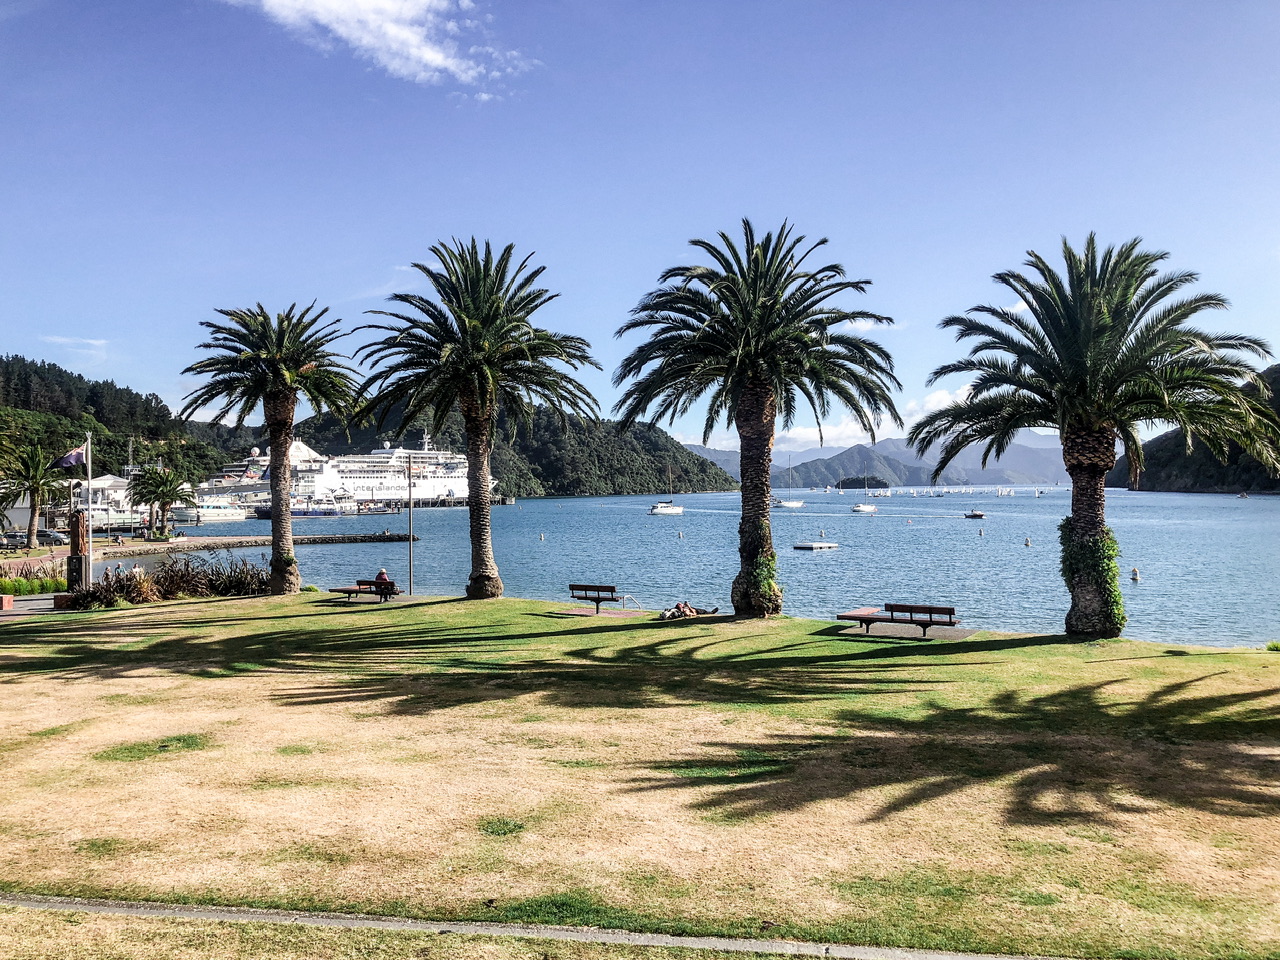 View of the Picton Waterfront with four large palm trees at the edge of the grass with be benches between, in front of which is the sea. The Interislander ferry is berthed to the right.